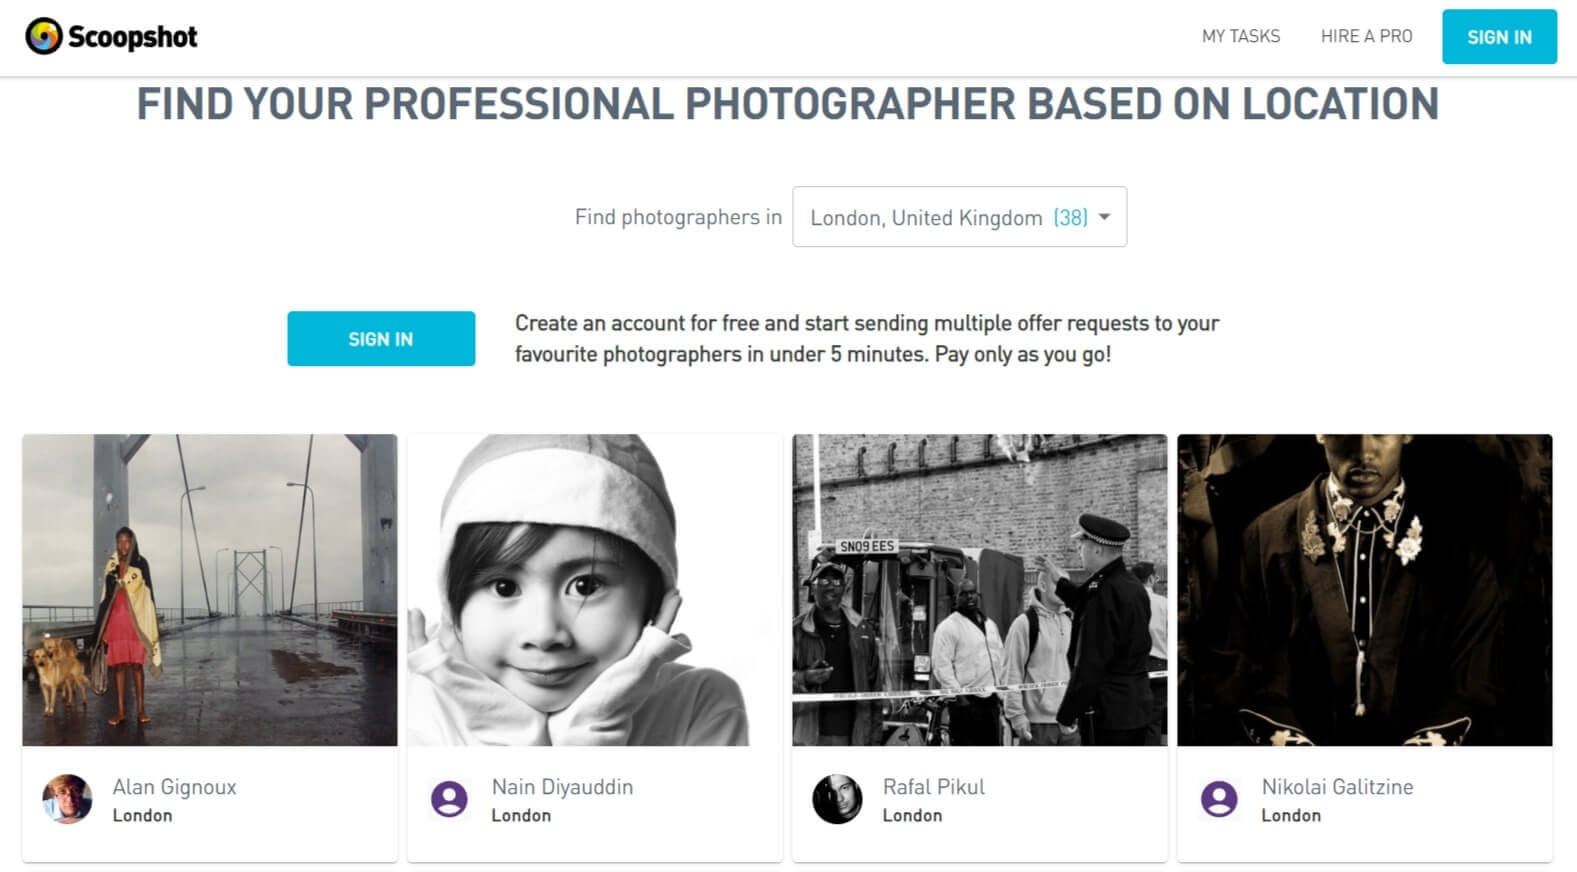 A screenshot of Scoopshot website featuring the creations of professional photographers and encouraging site visitors to create an account for free.